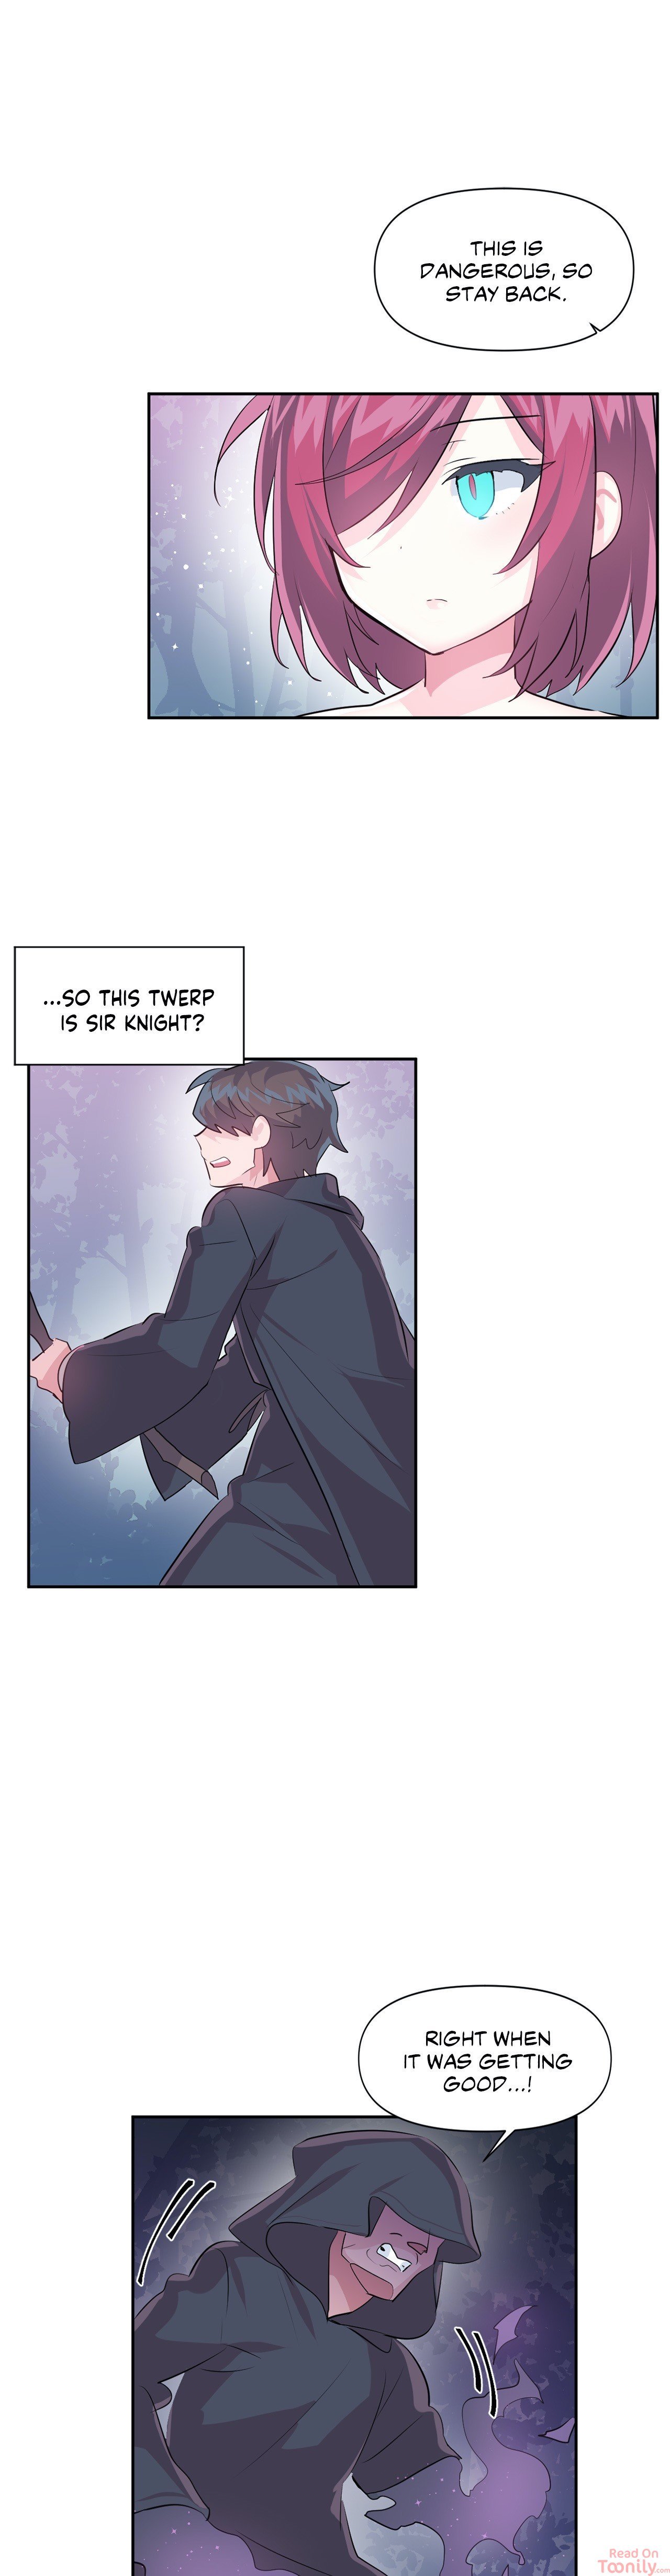 log-in-to-lust-a-land-chap-36-18